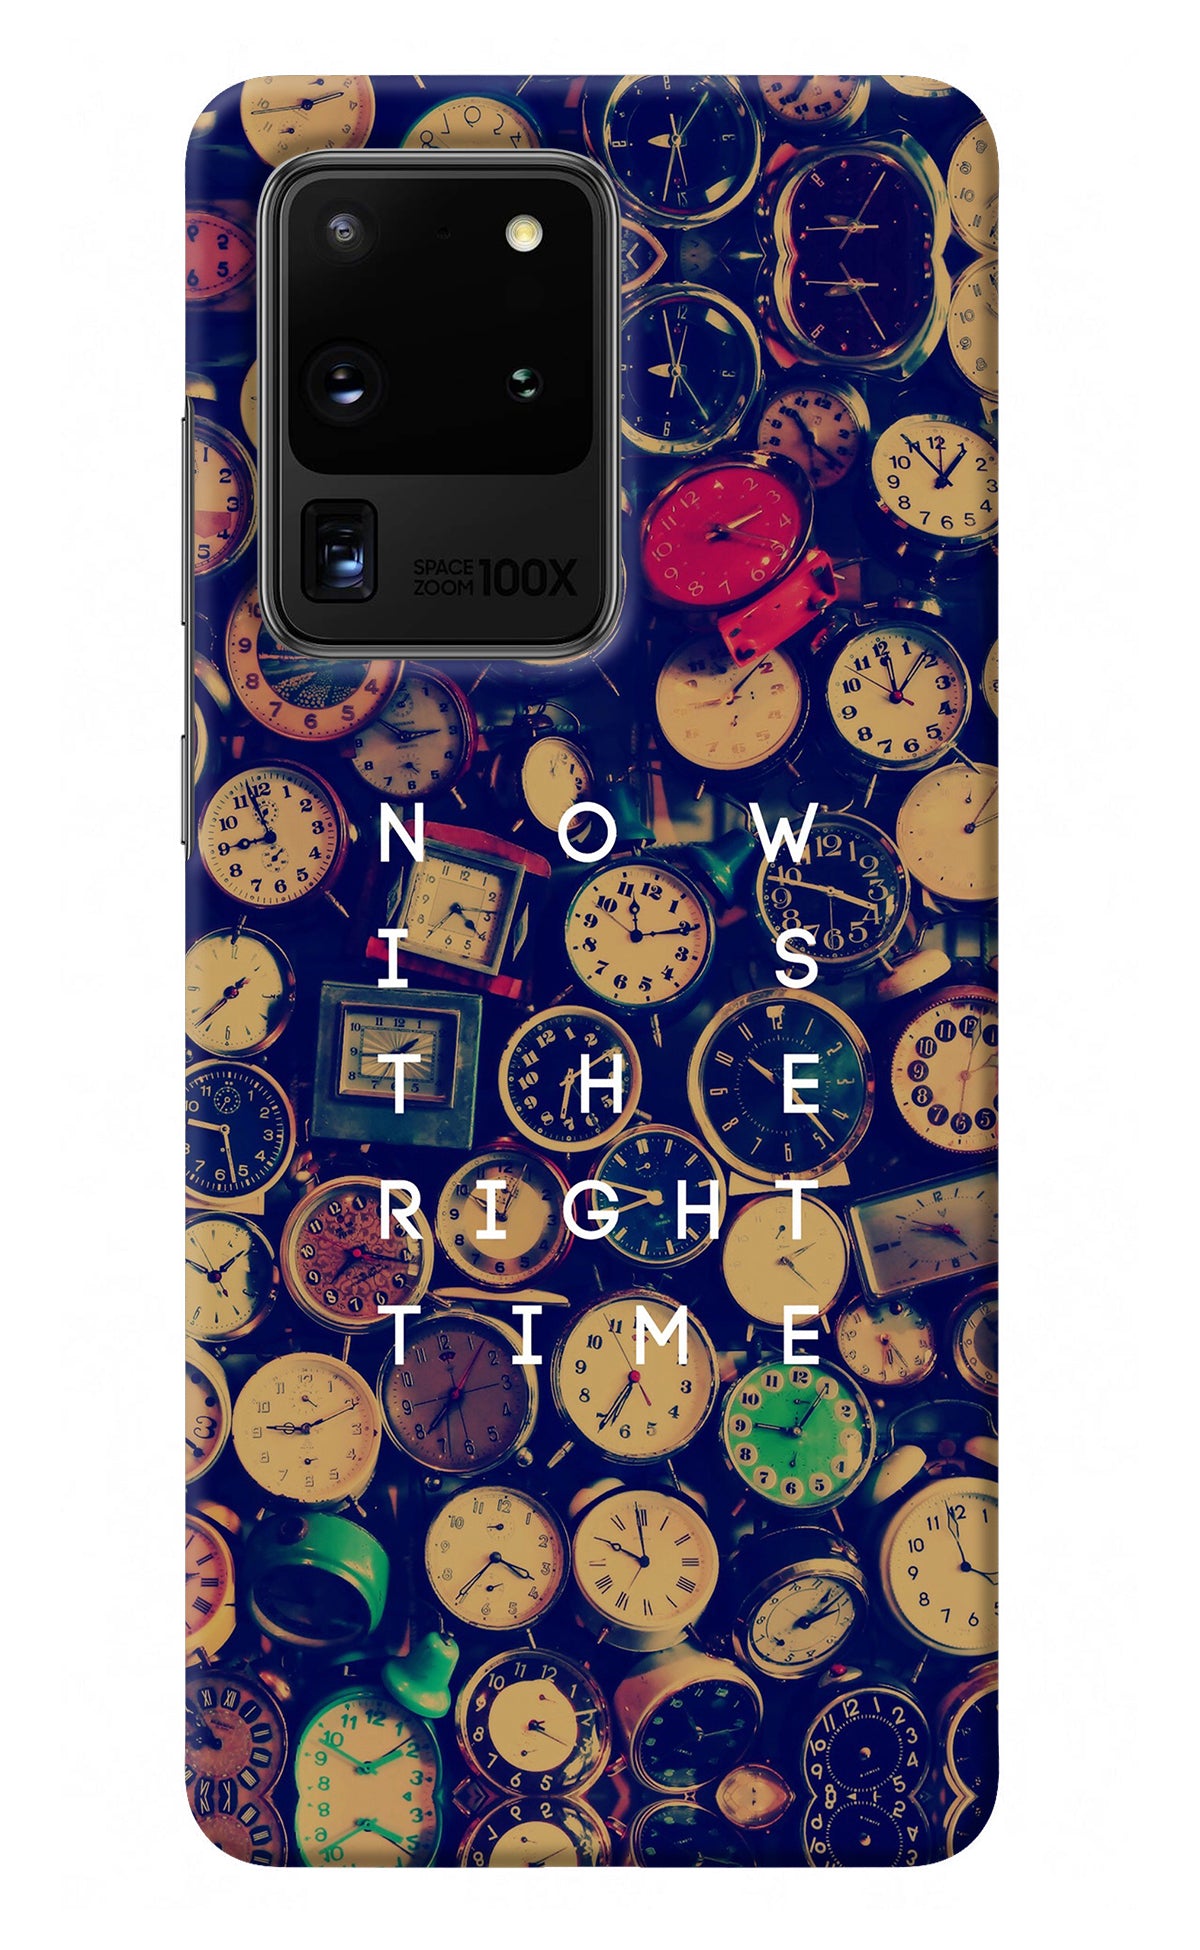 Now is the Right Time Quote Samsung S20 Ultra Back Cover